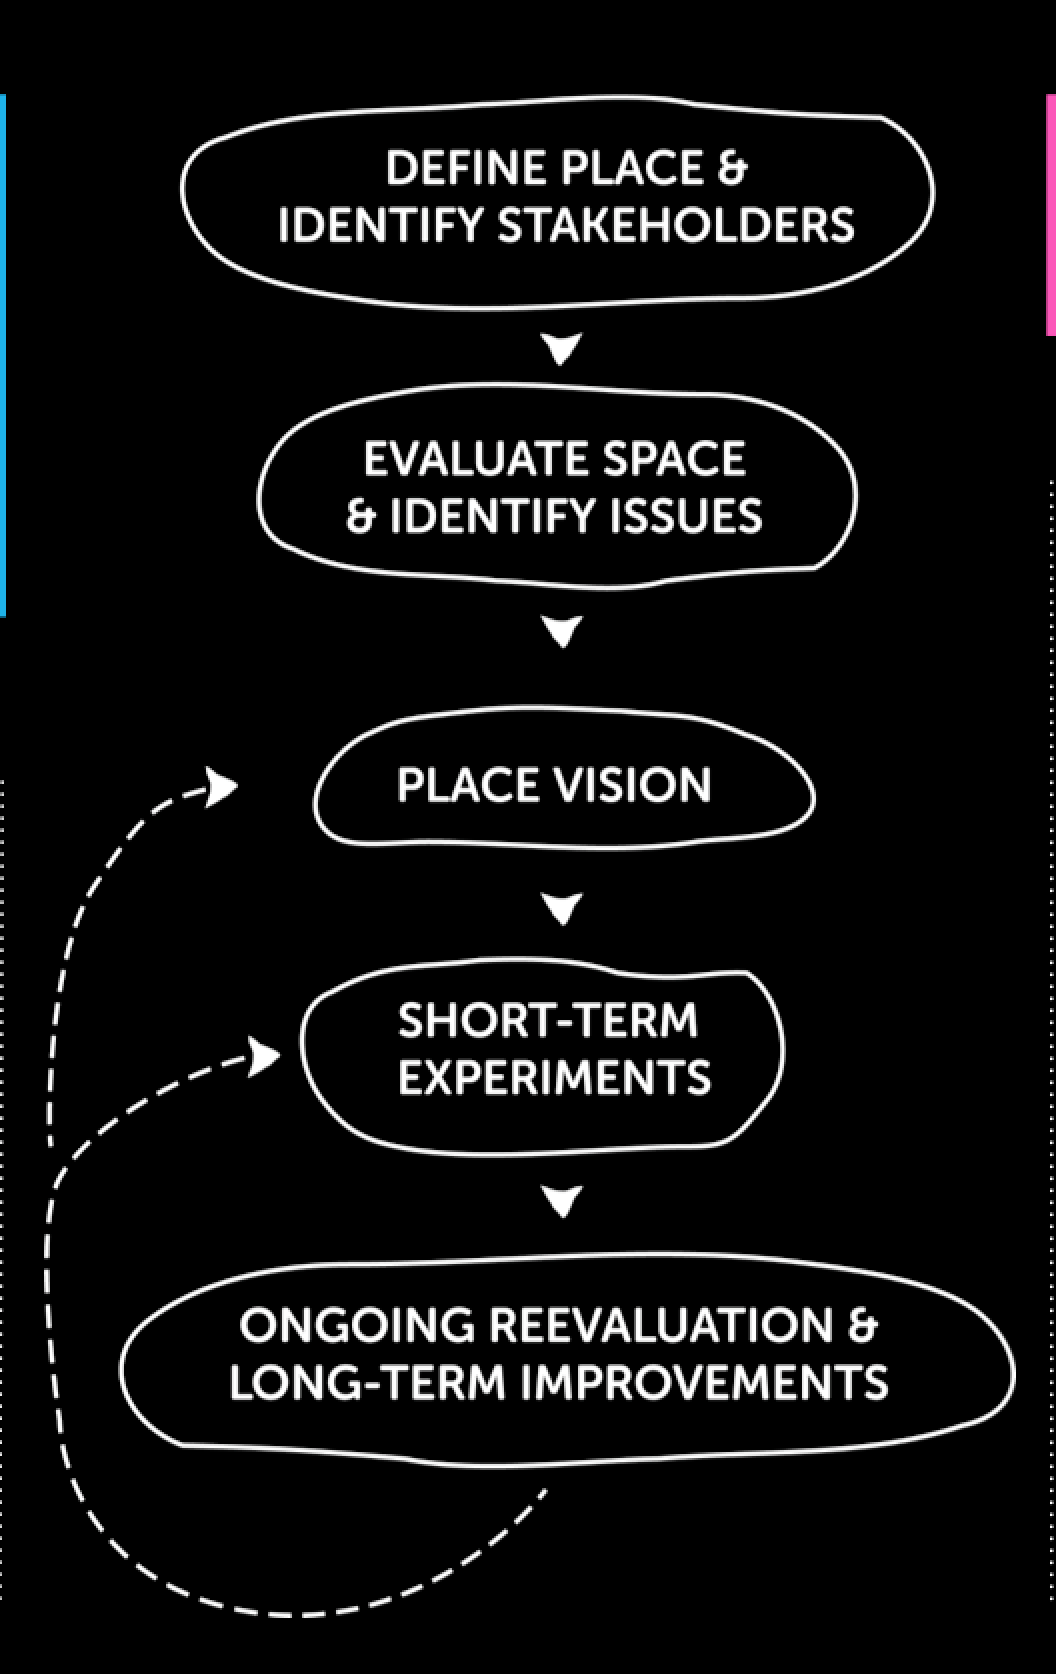 An info graphic showing the flow of a project. The steps are define place and identify stakeholders, evaluate space and identify issues, place vision, short-term experiments, and ongoing reevaluation and long-term improvements